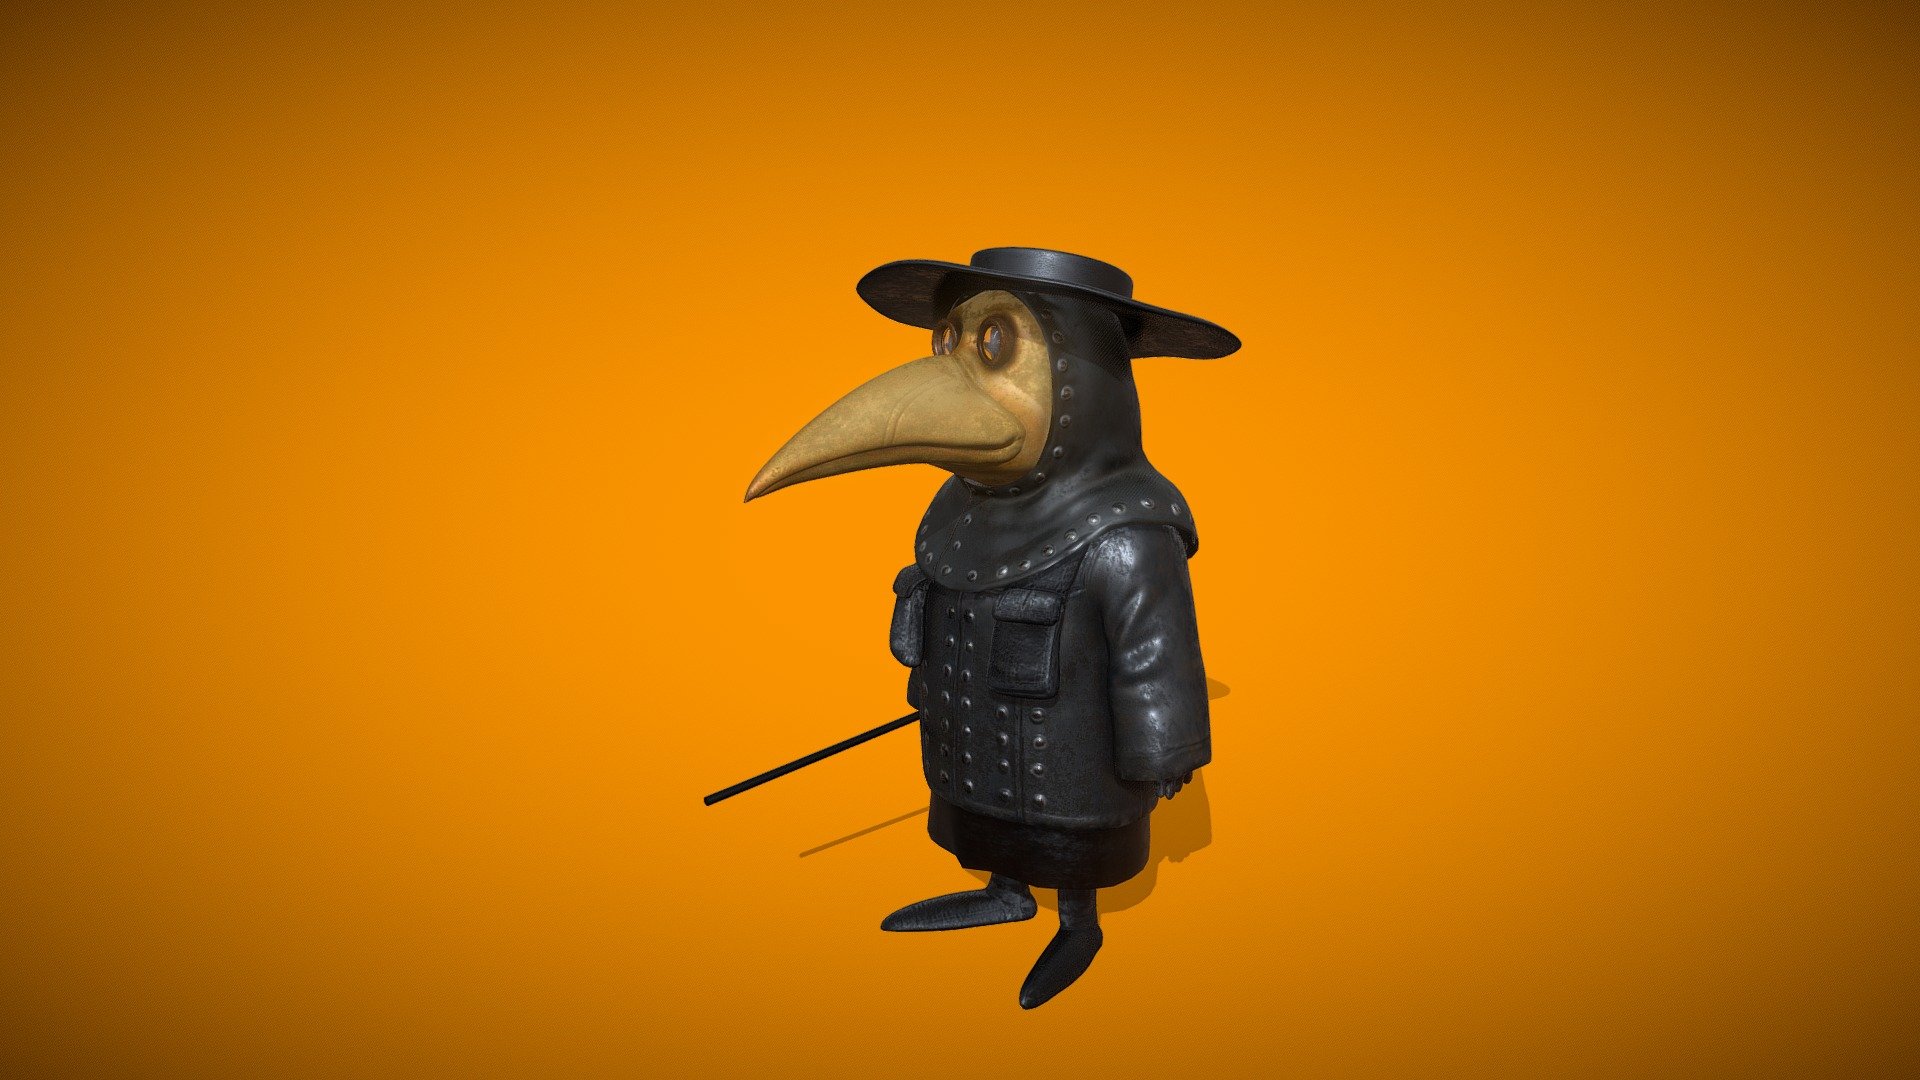 The mask of the plague doctor is of course the mask I would most like to wear, and the &ldquo;crow's-mouth